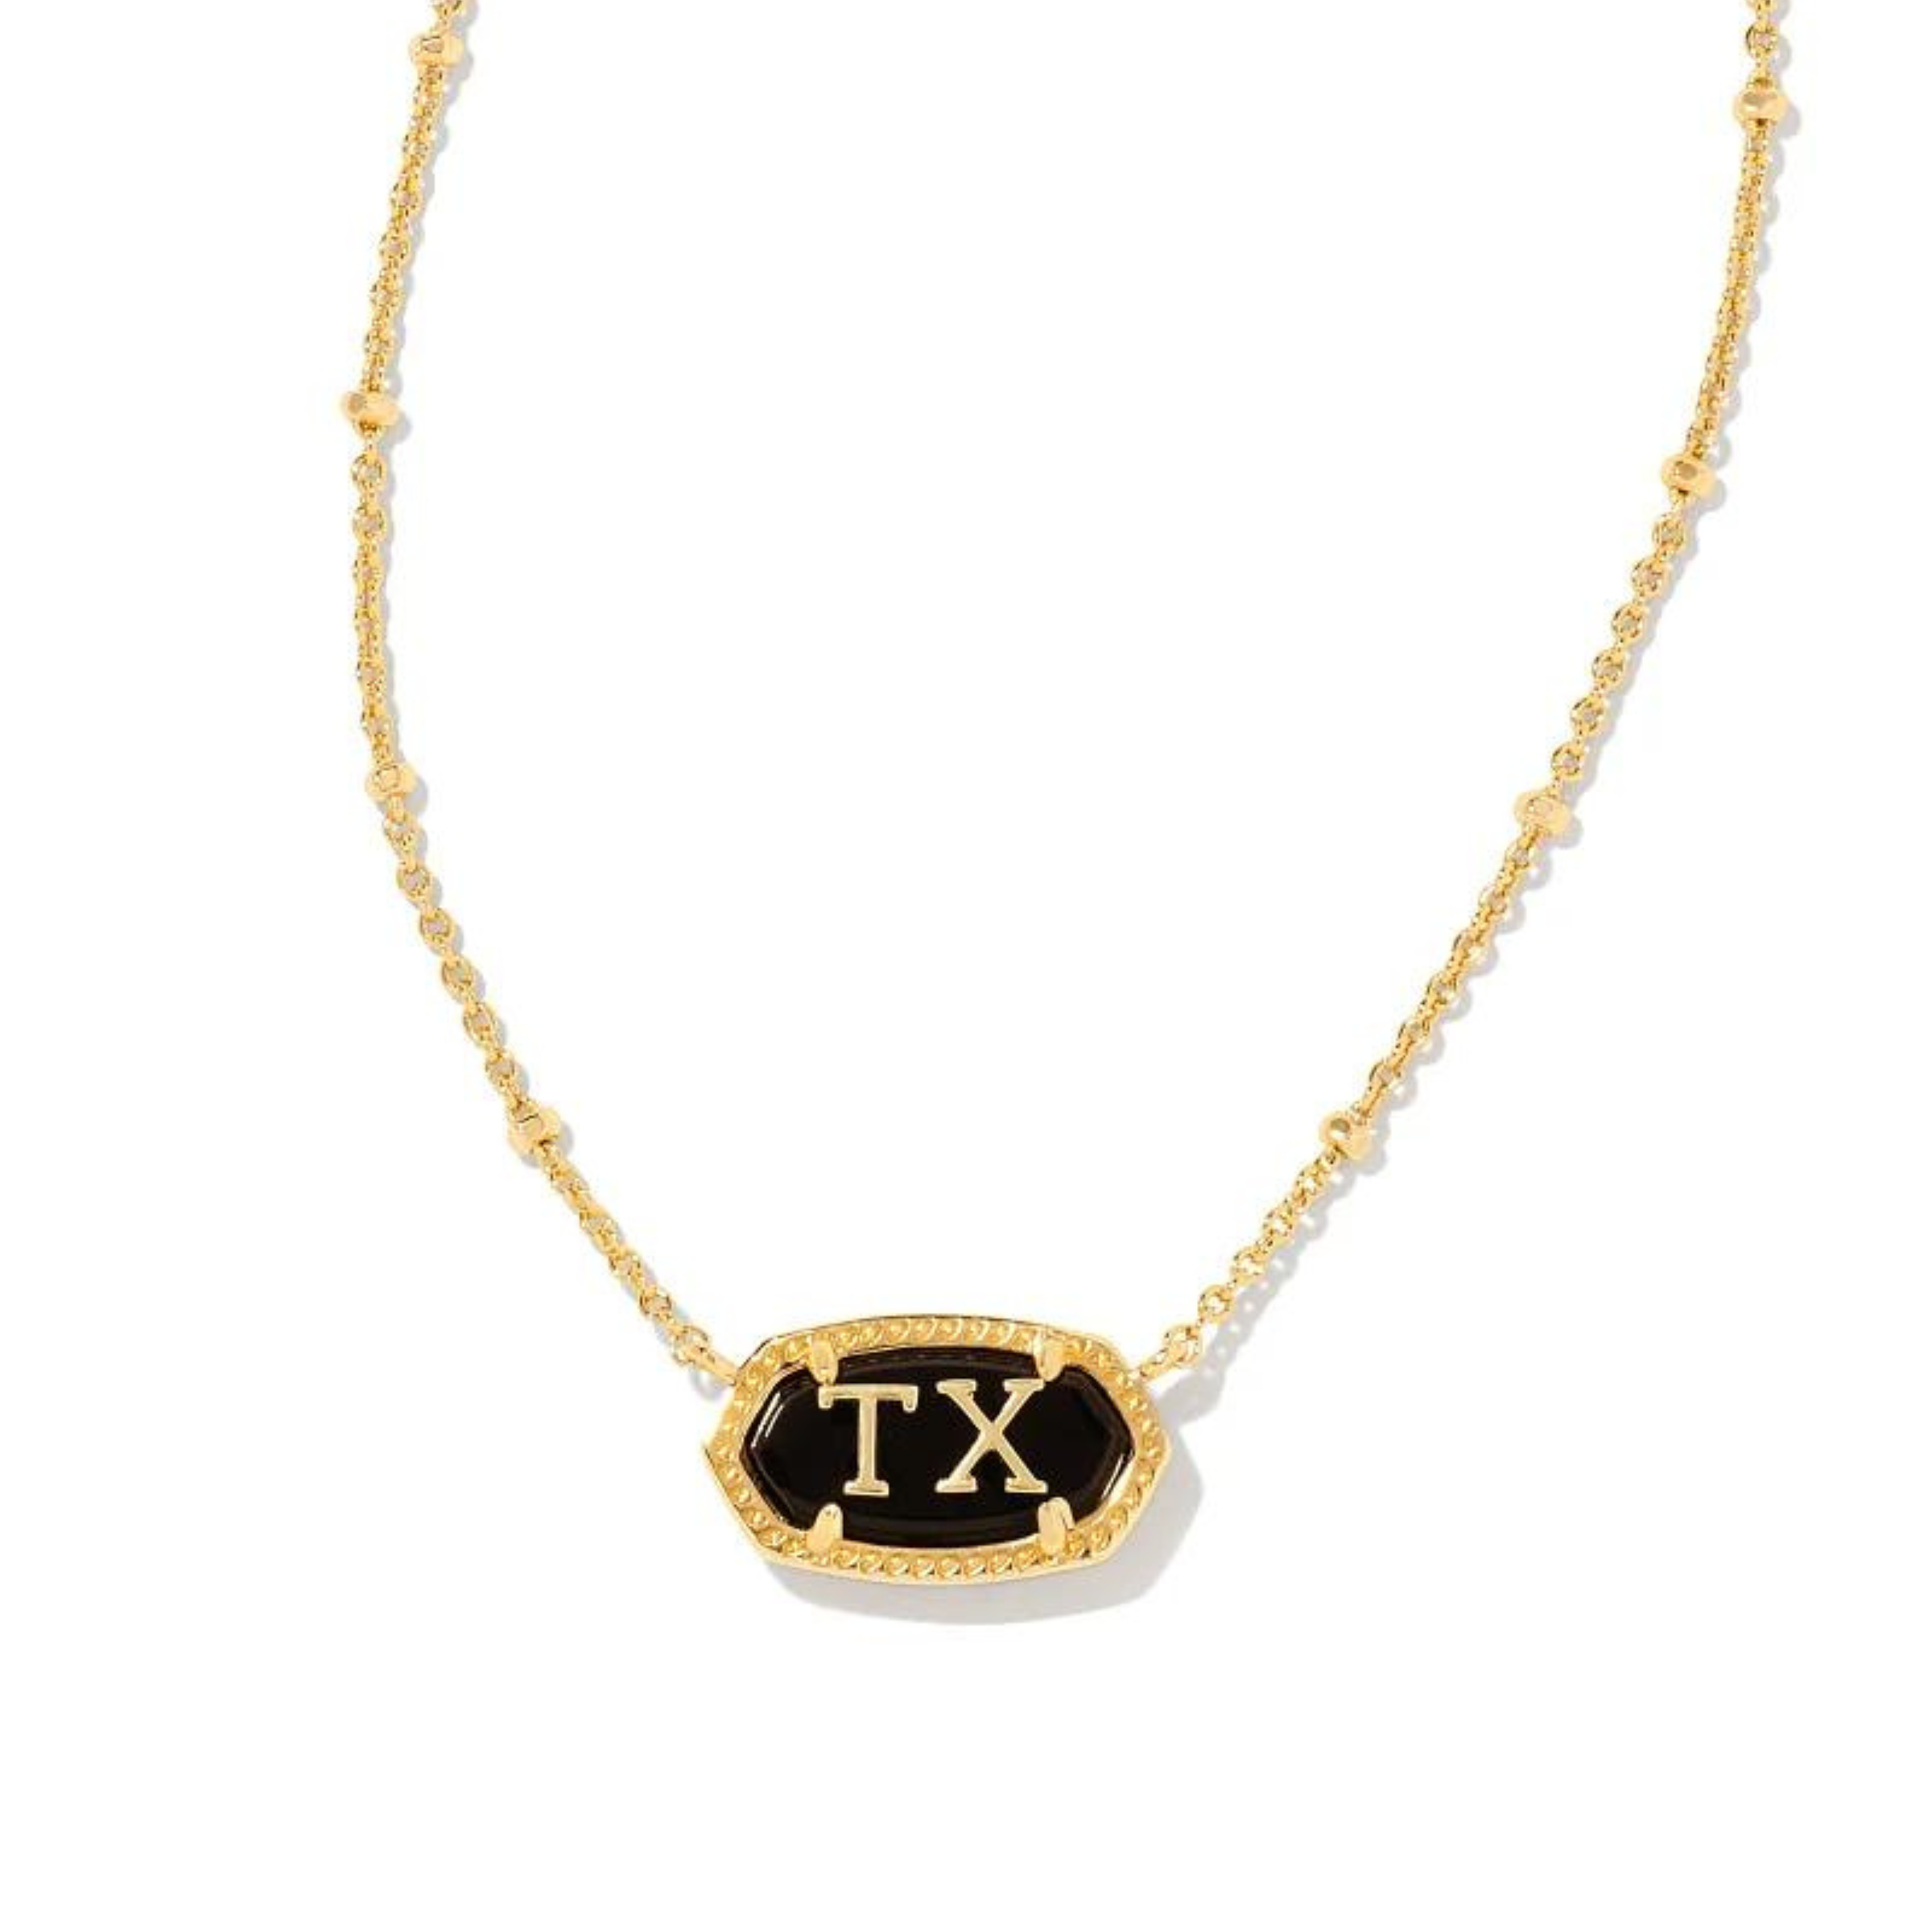 Pictured on a white background is a gold chain necklace with a black stone, oval pendant. This pendant has a gold outline and gold "TX" in the center.  